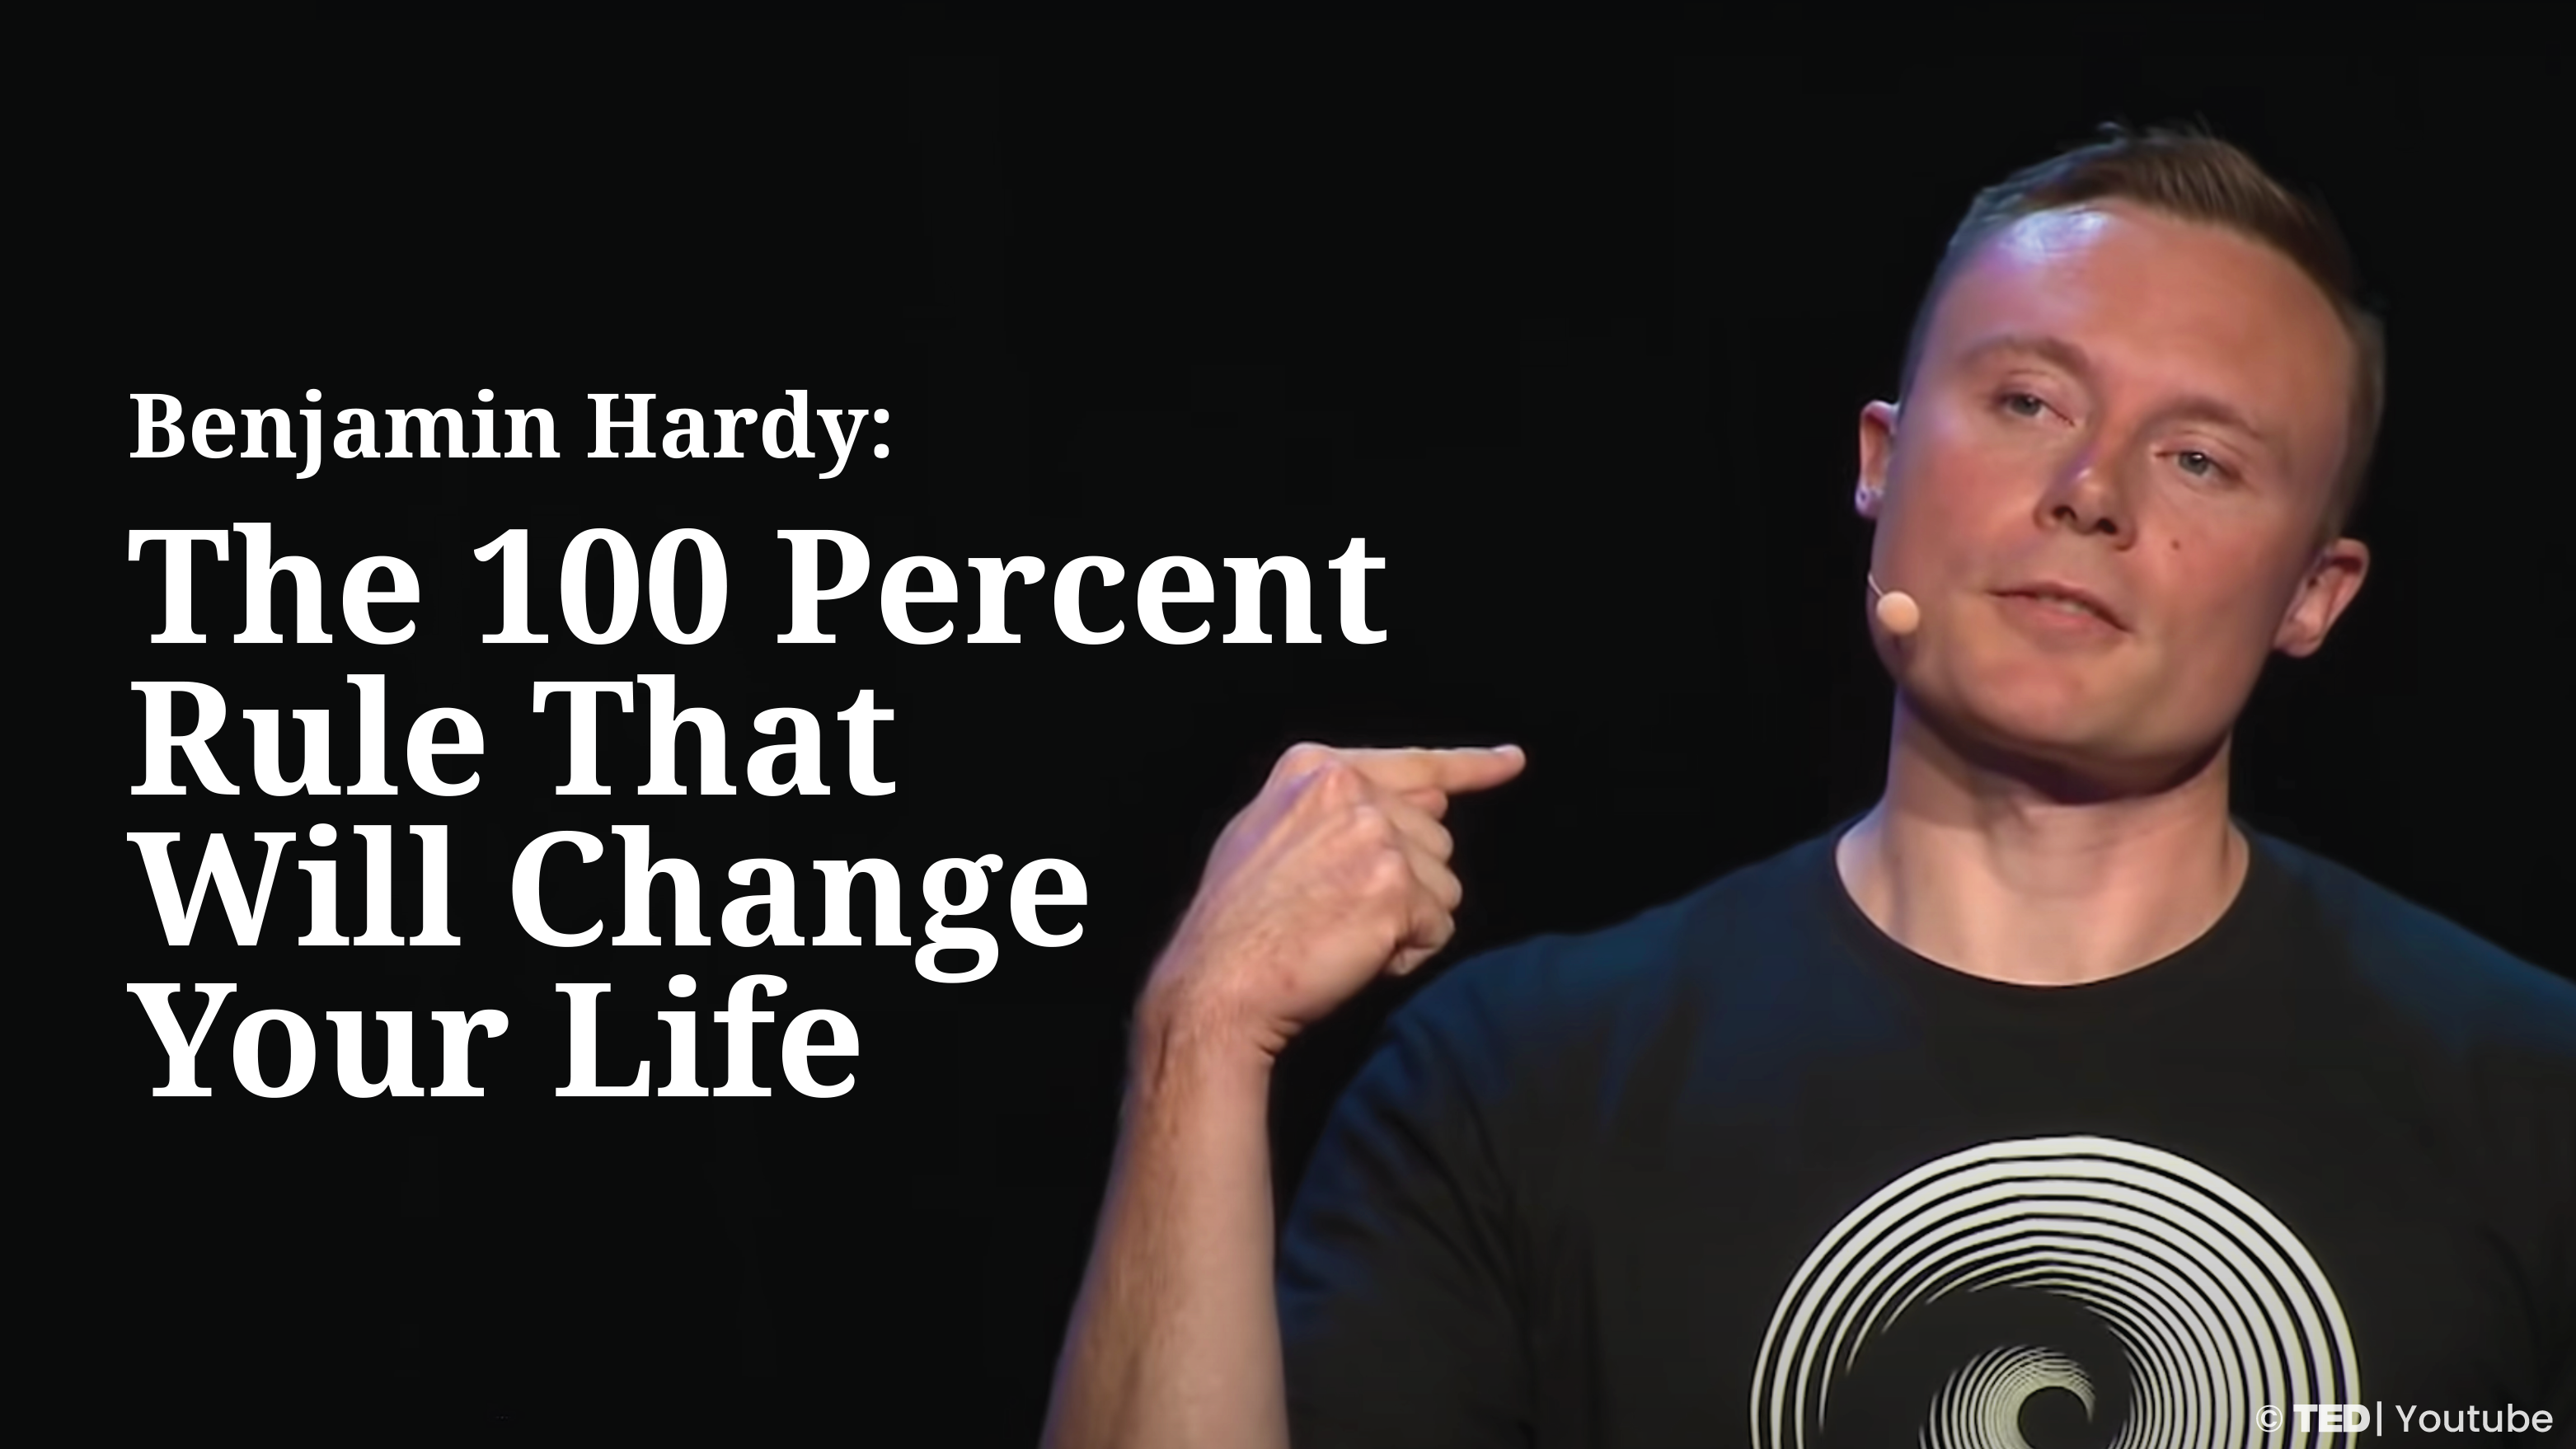 [A+] Benjamin Hardy:The 100 Percent Rule That Will Change Your Life [FULL]